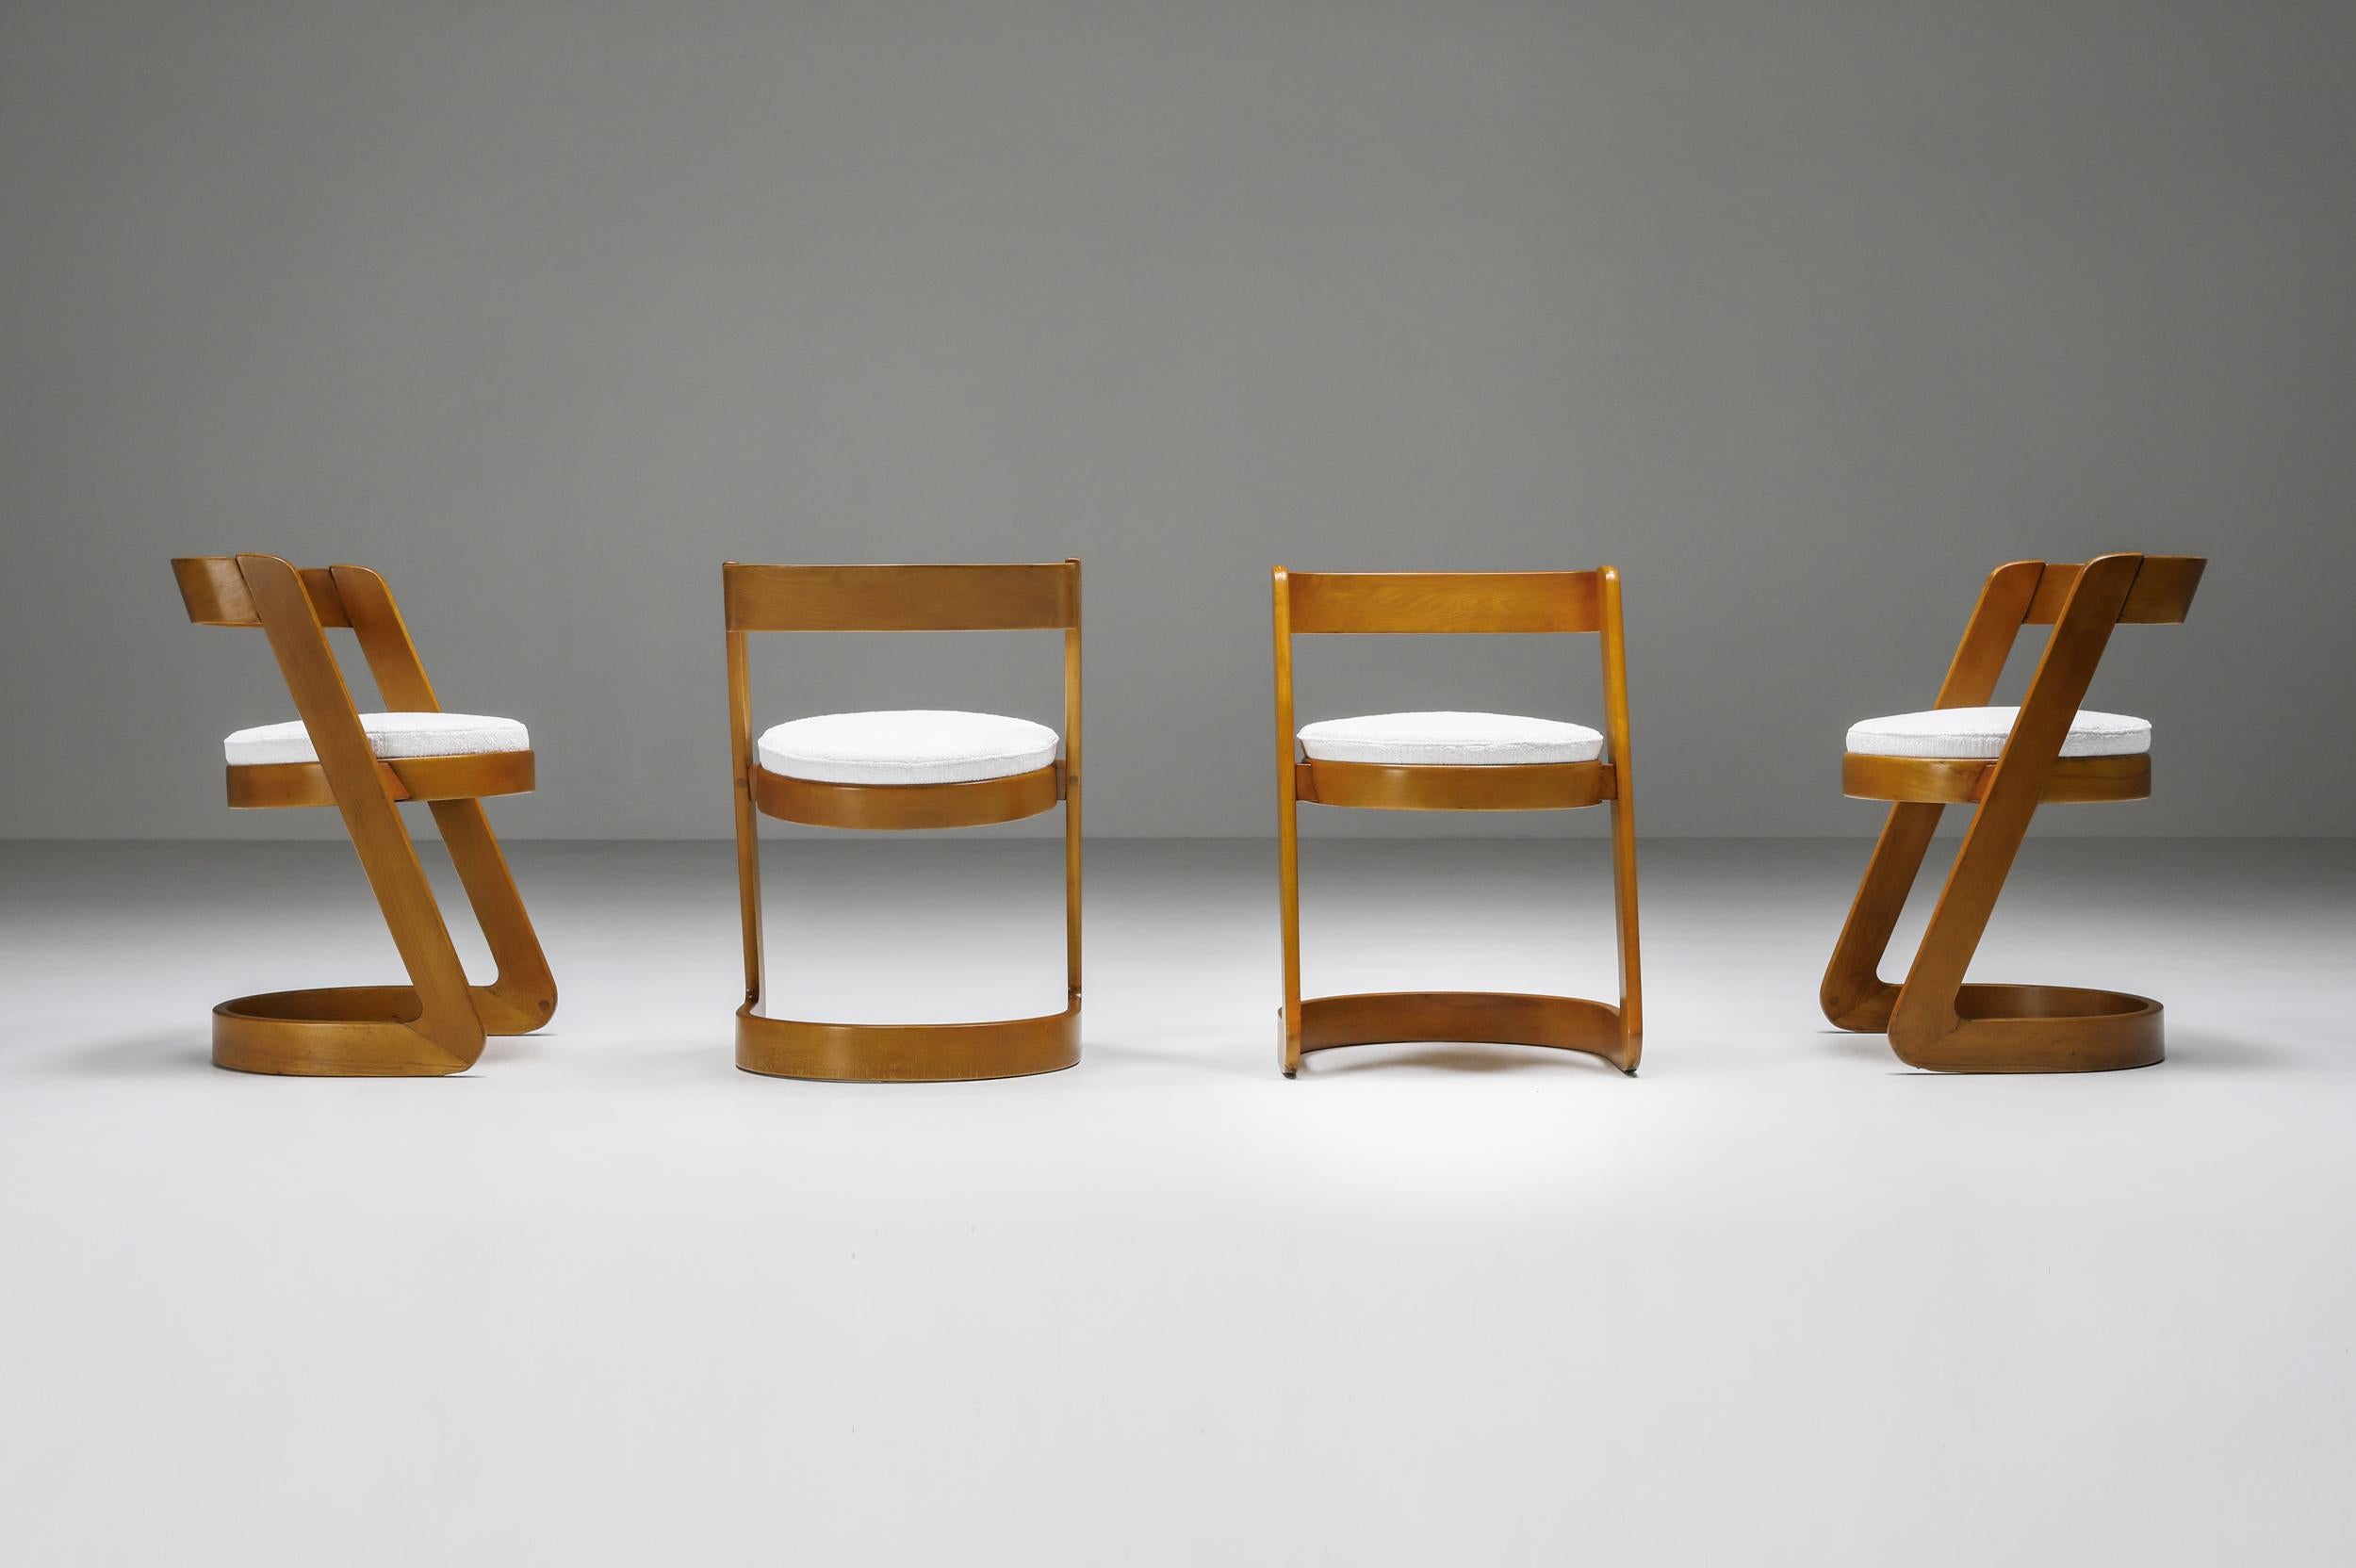 Willy Rizzo dining chairs set by Mario Sabot, Italy - 1970's; Italian Design

Delightful and petit mid-century wooden chair designed by Willy Rizzo for Mario Sabot.

This set of four chairs was produced during the 1970s in Italy. The wood in